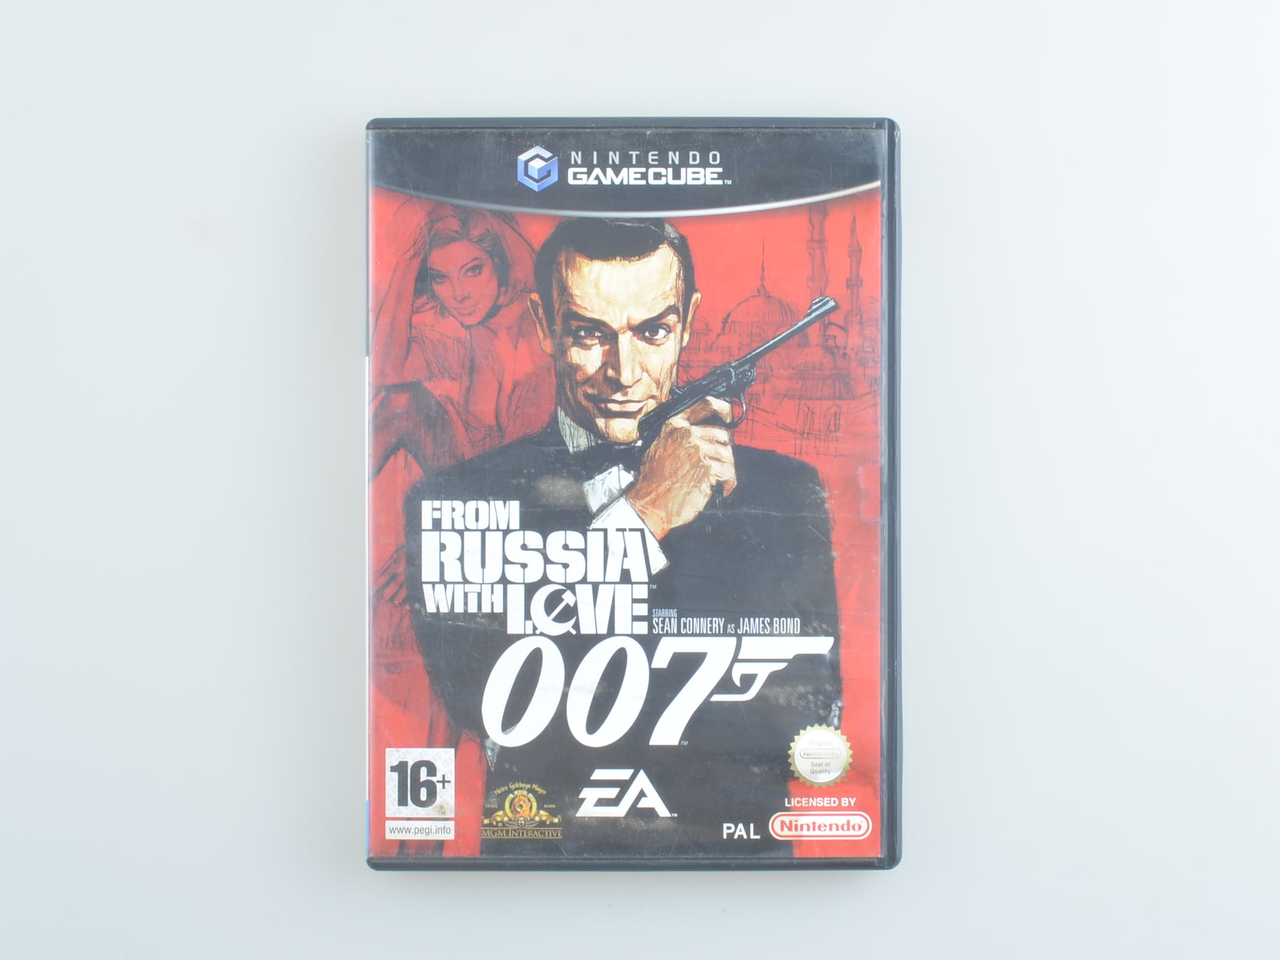 From Russia with Love - Gamecube Games